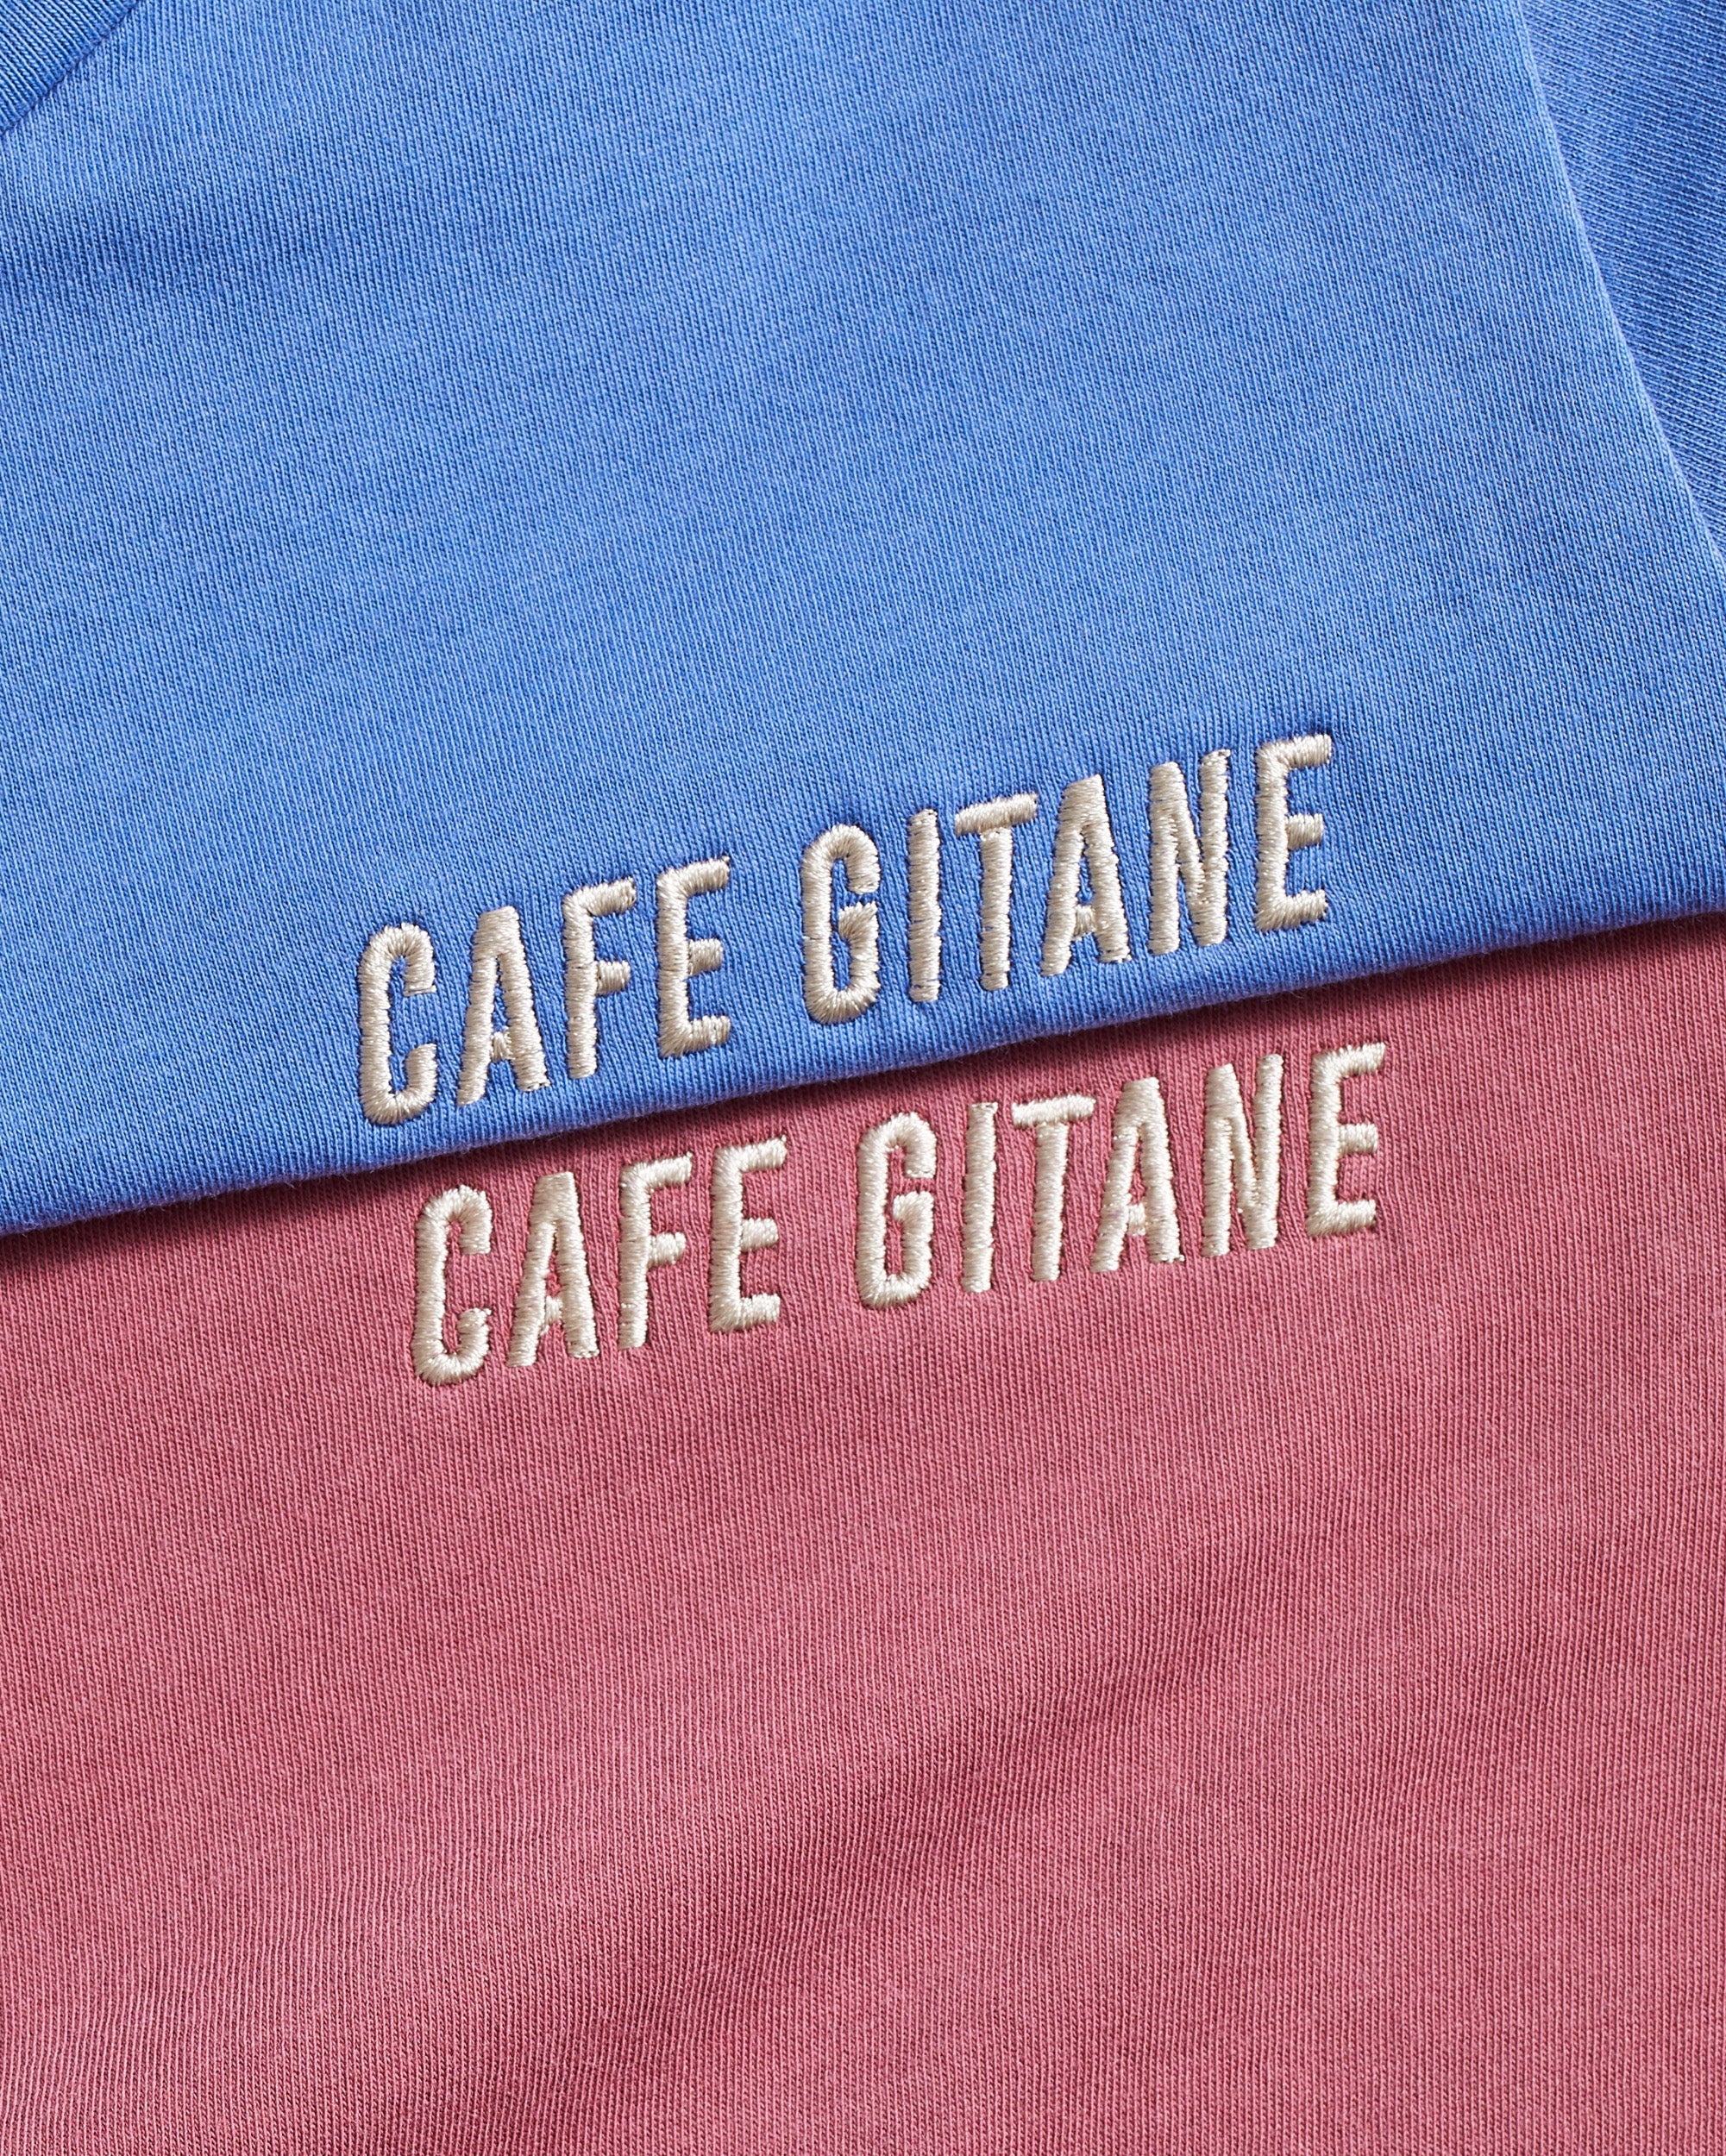 The Cafe Gitane Vintage Wash Embroidered Tee is 100% ring spun cotton and made in the USA. The classic t-shirt is available in red clay and sky blue is embroidered on the left chest in a silver-gray thread. The t-shirt is pigment dyed which means that it has a sublet vintage look and will get more wash the older it gets.